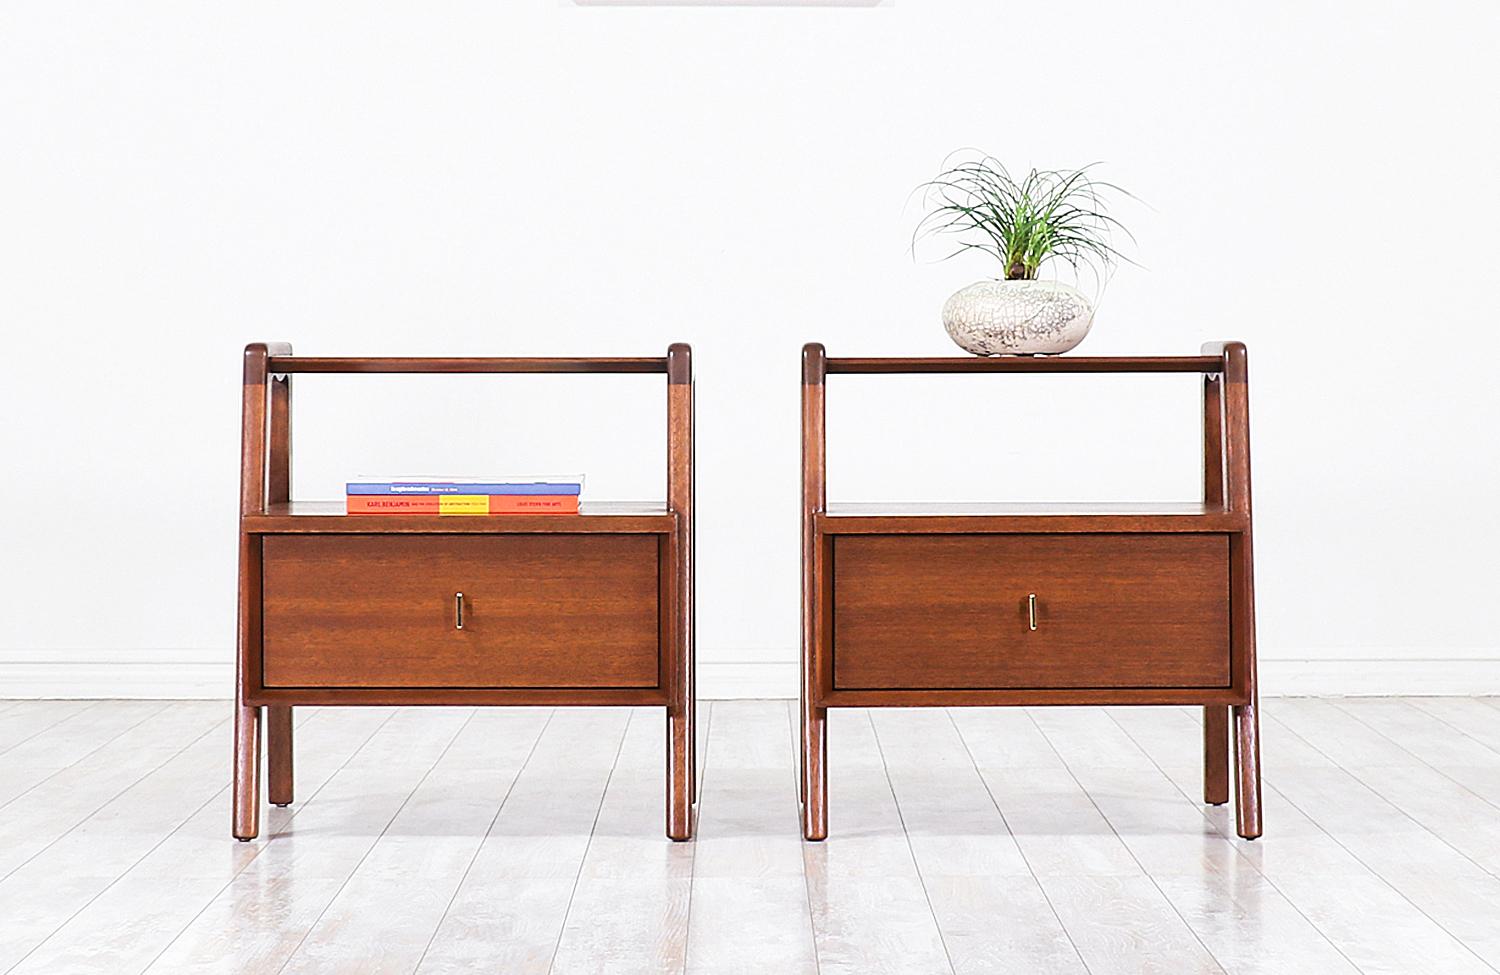 A pair of elegant modern nightstands designed by John Keal for Brown Saltman in the United States, circa 1960s. This fabulous pair of nightstands are built on solid walnut-stained mahogany wood featuring a single sculpted drawer to store bedside